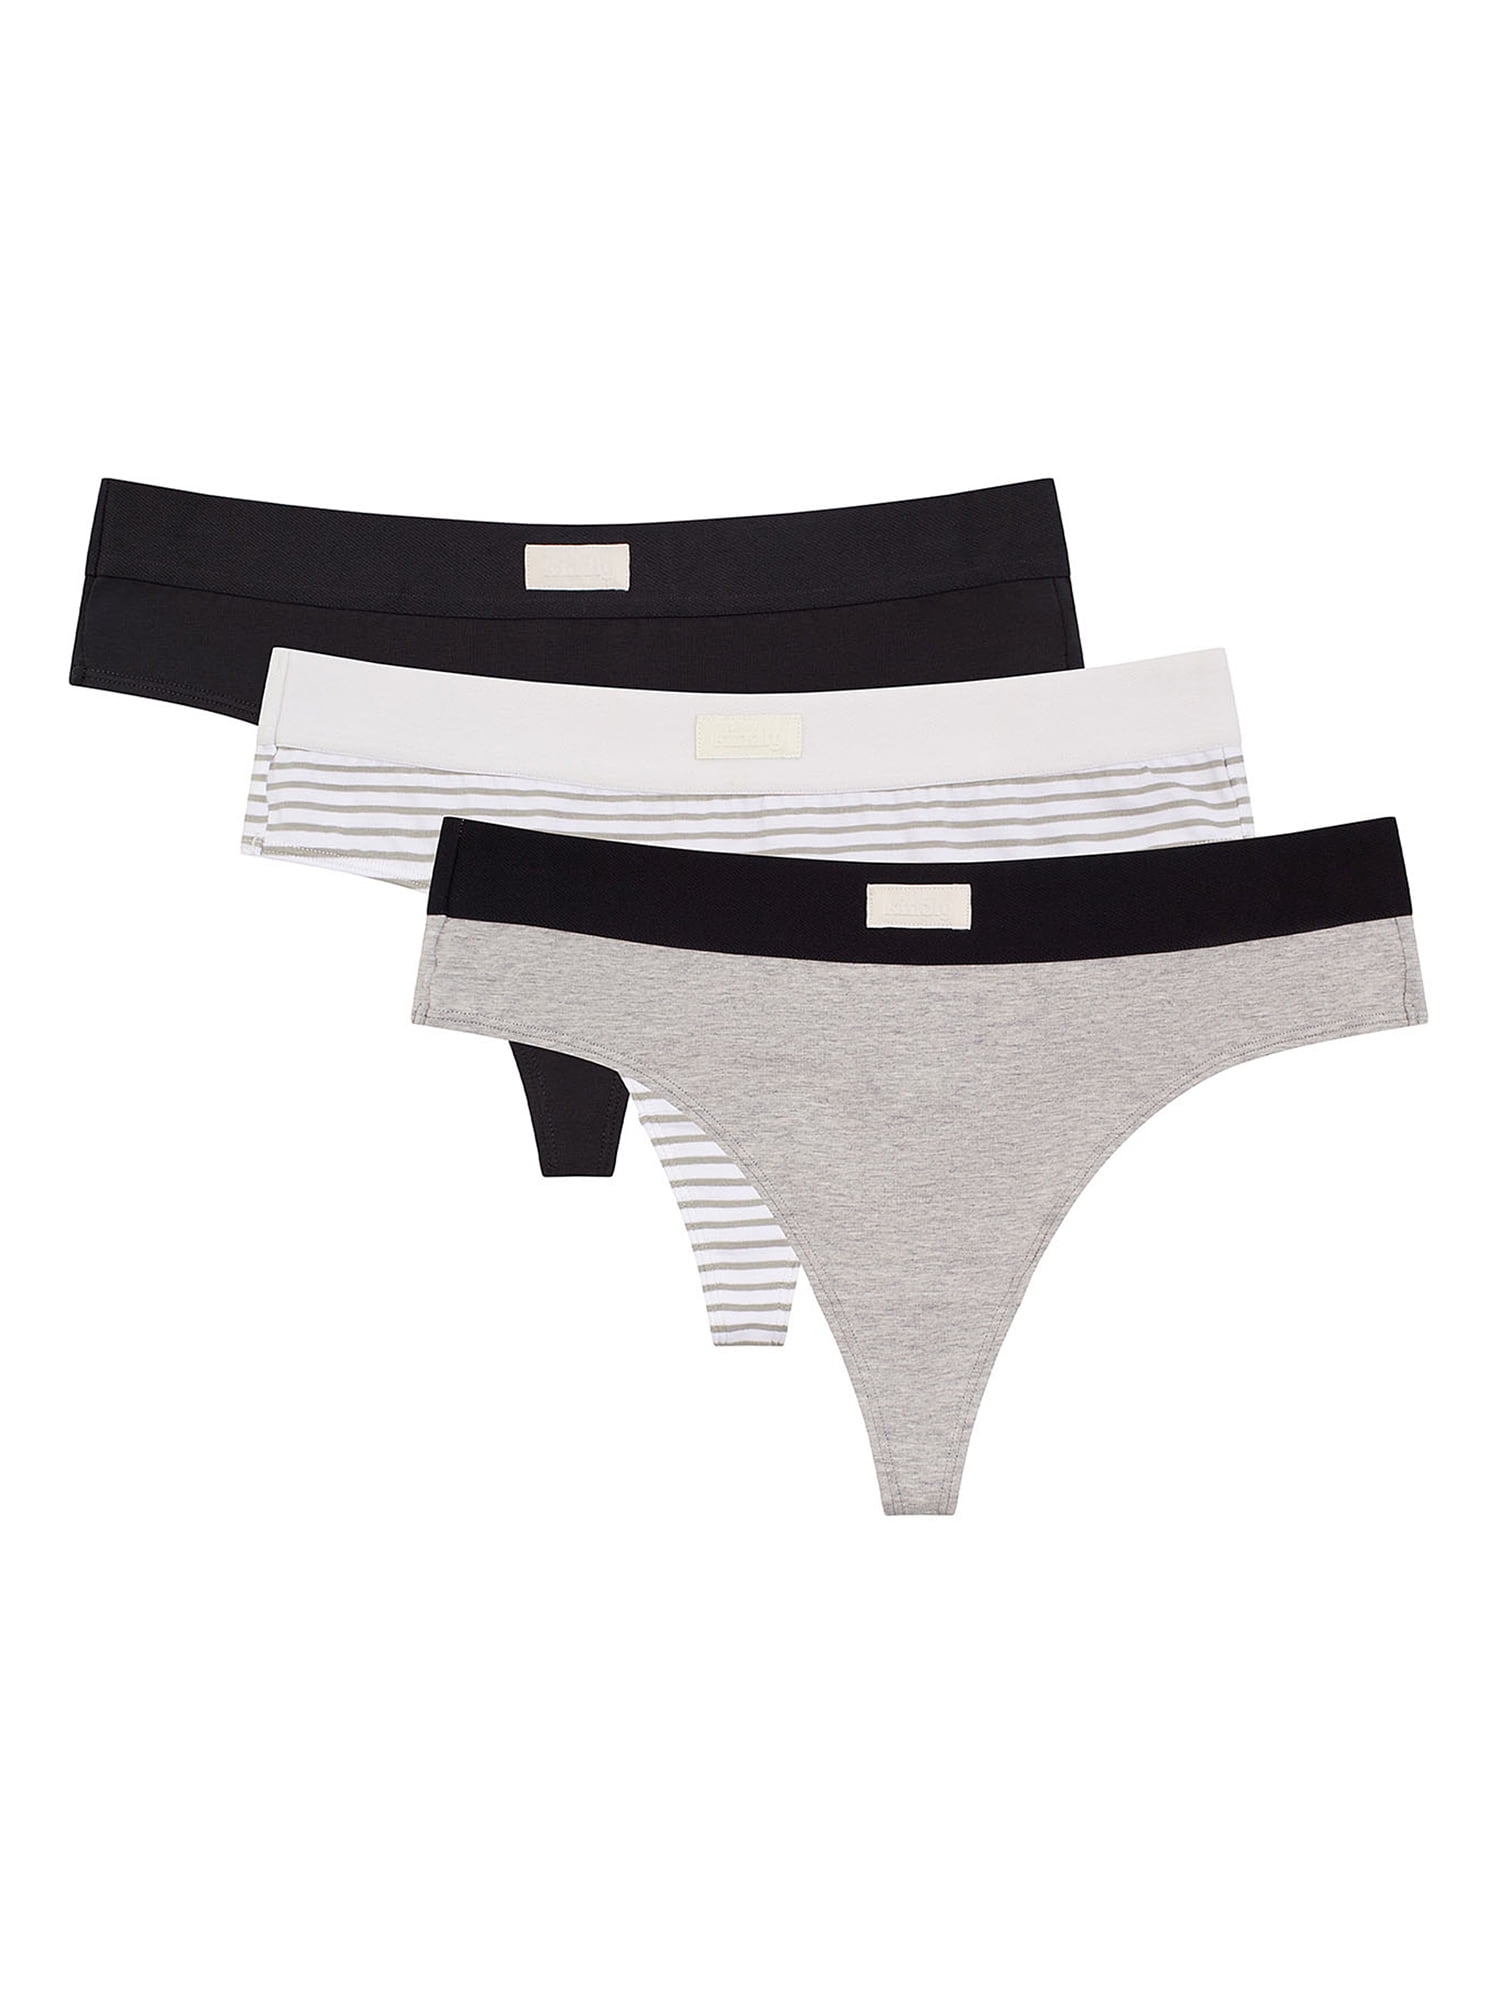 Kindly Yours Women’s Sustainable Cotton Thong Underwear, 3-Pack ...